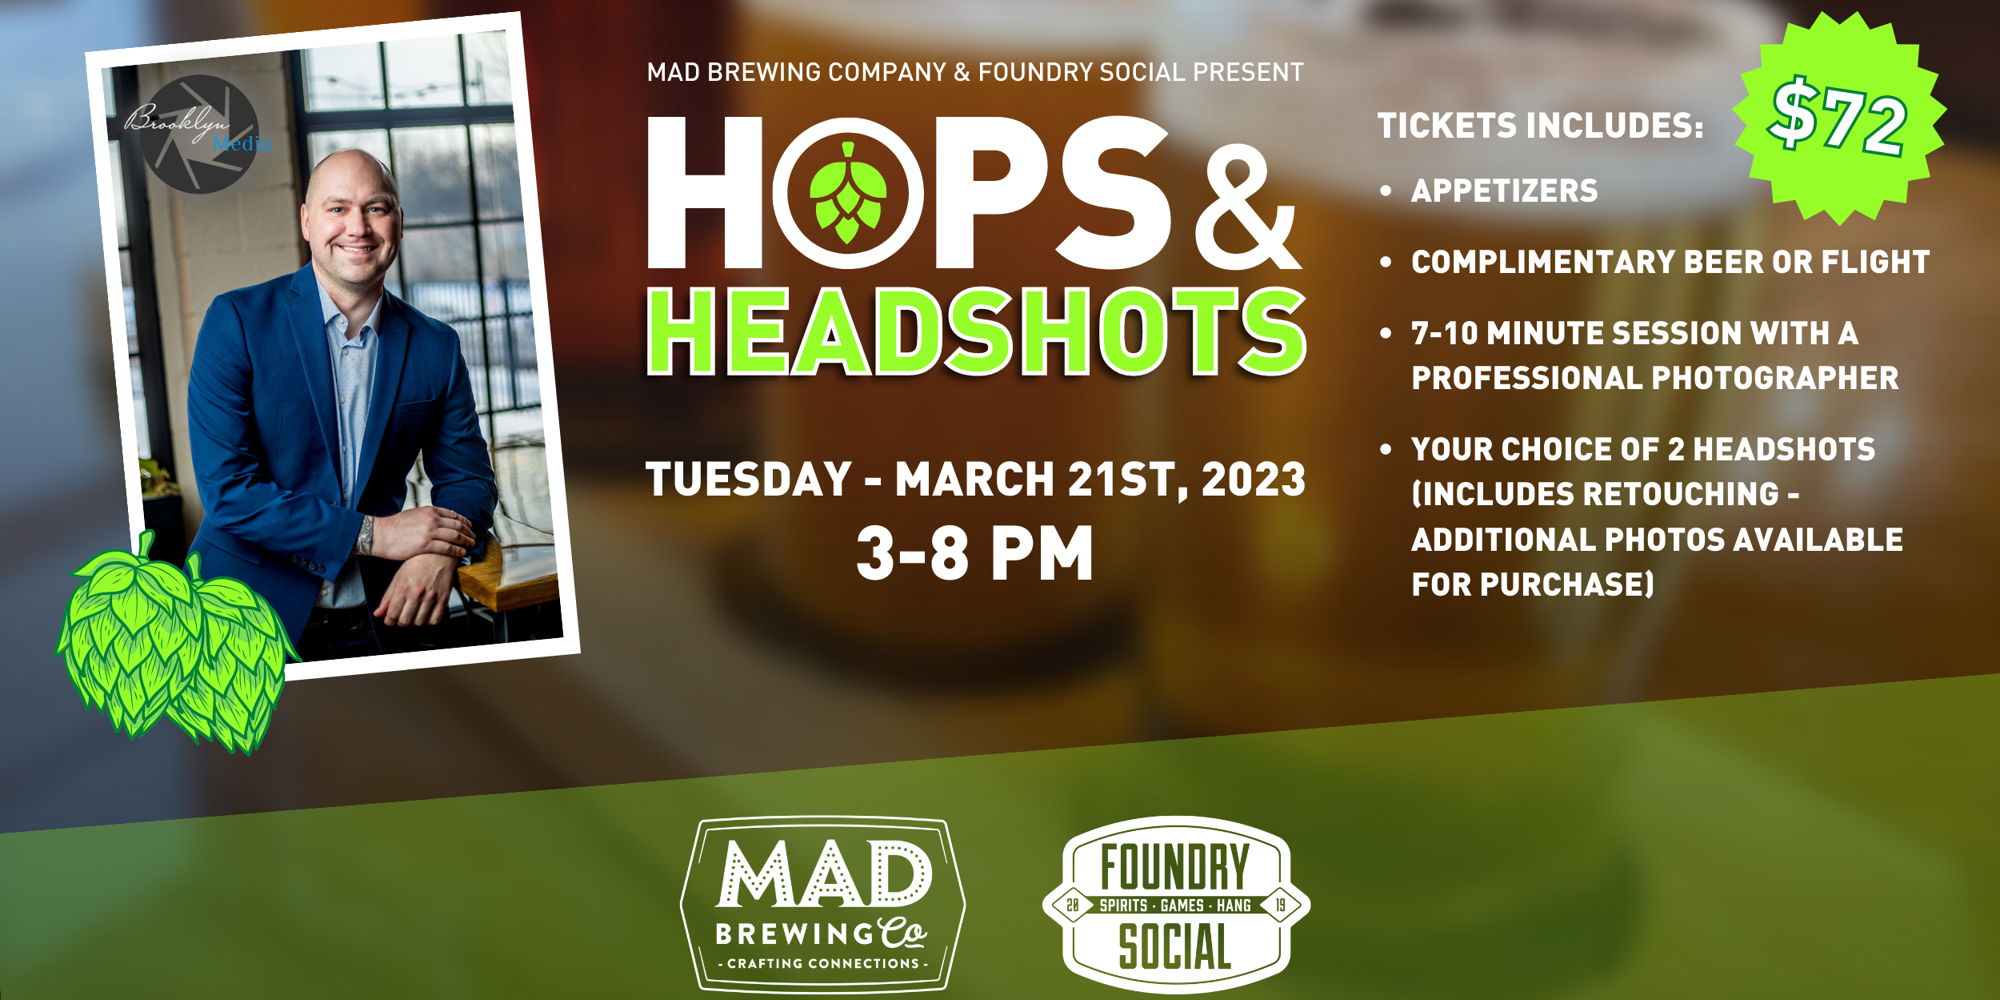 Hops & Headshots - MAD Brewing Co & Foundry Social promotional image